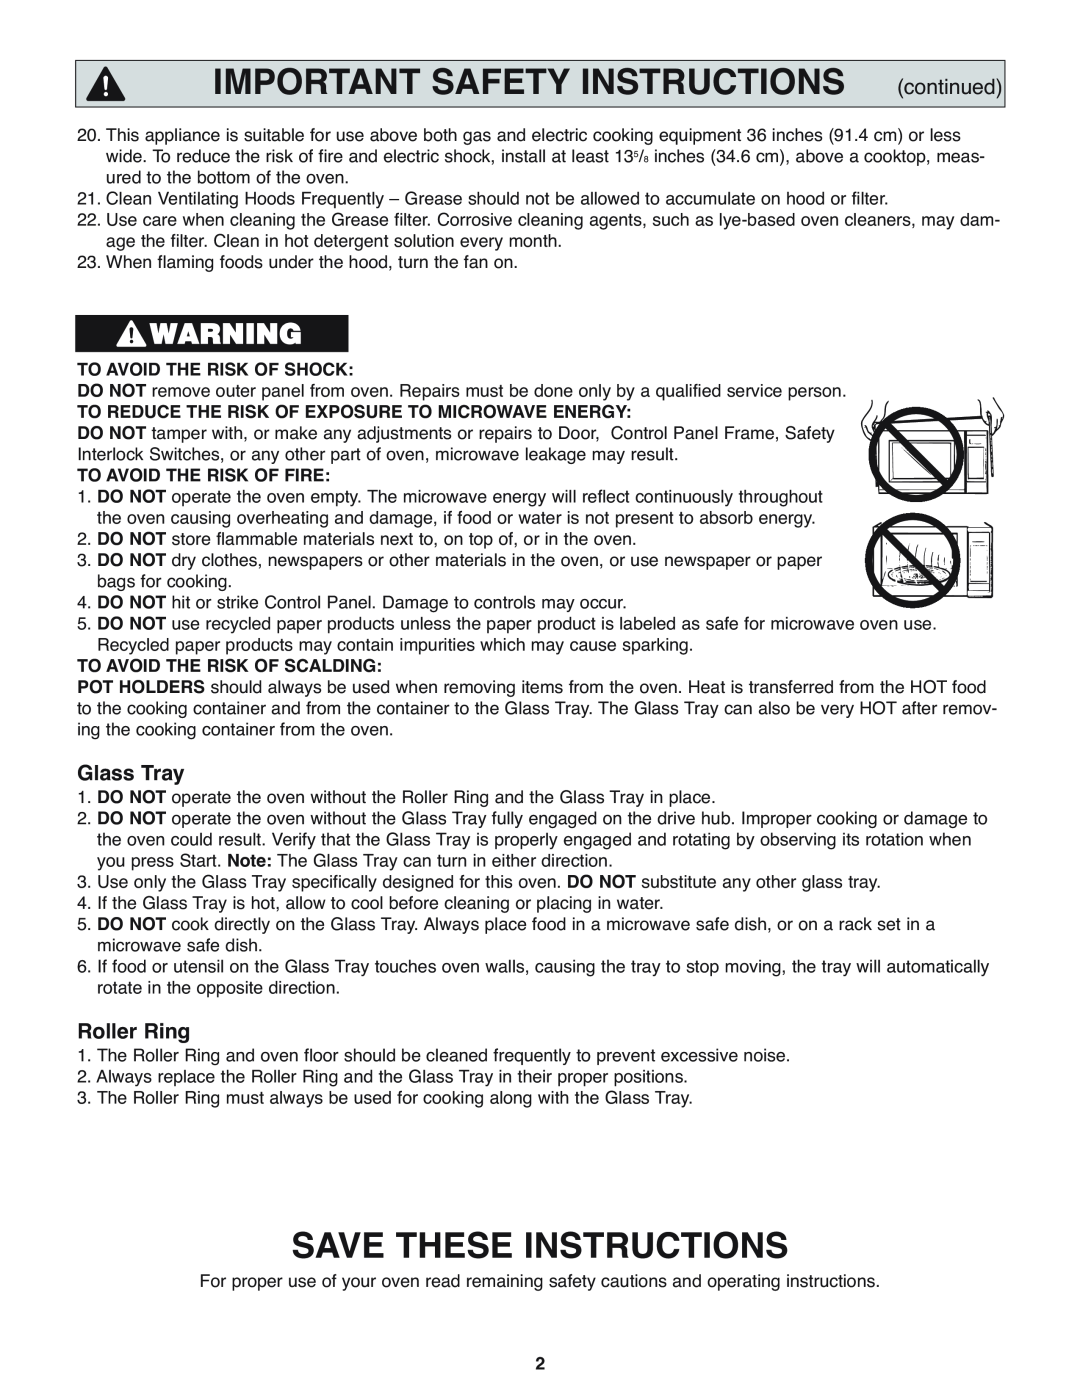 Panasonic NN-H275 IMPORTANT SAFETY INSTRUCTIONS continued, Save These Instructions, Glass Tray, Roller Ring 